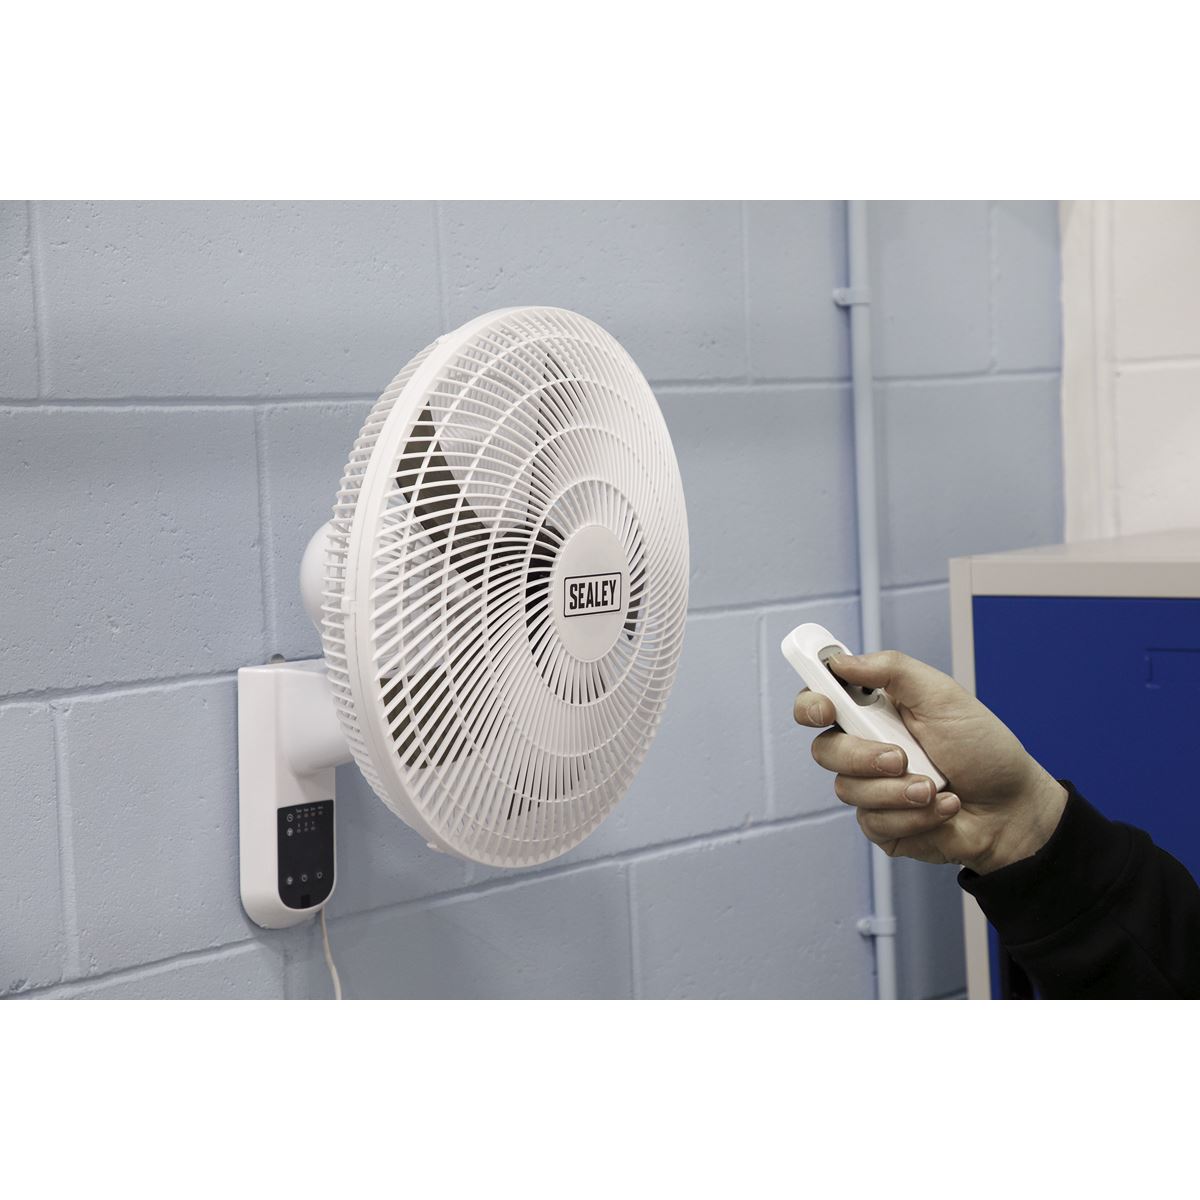 Sealey Wall Fan Remote Control 18" 3-Speed 230V Air Cooler